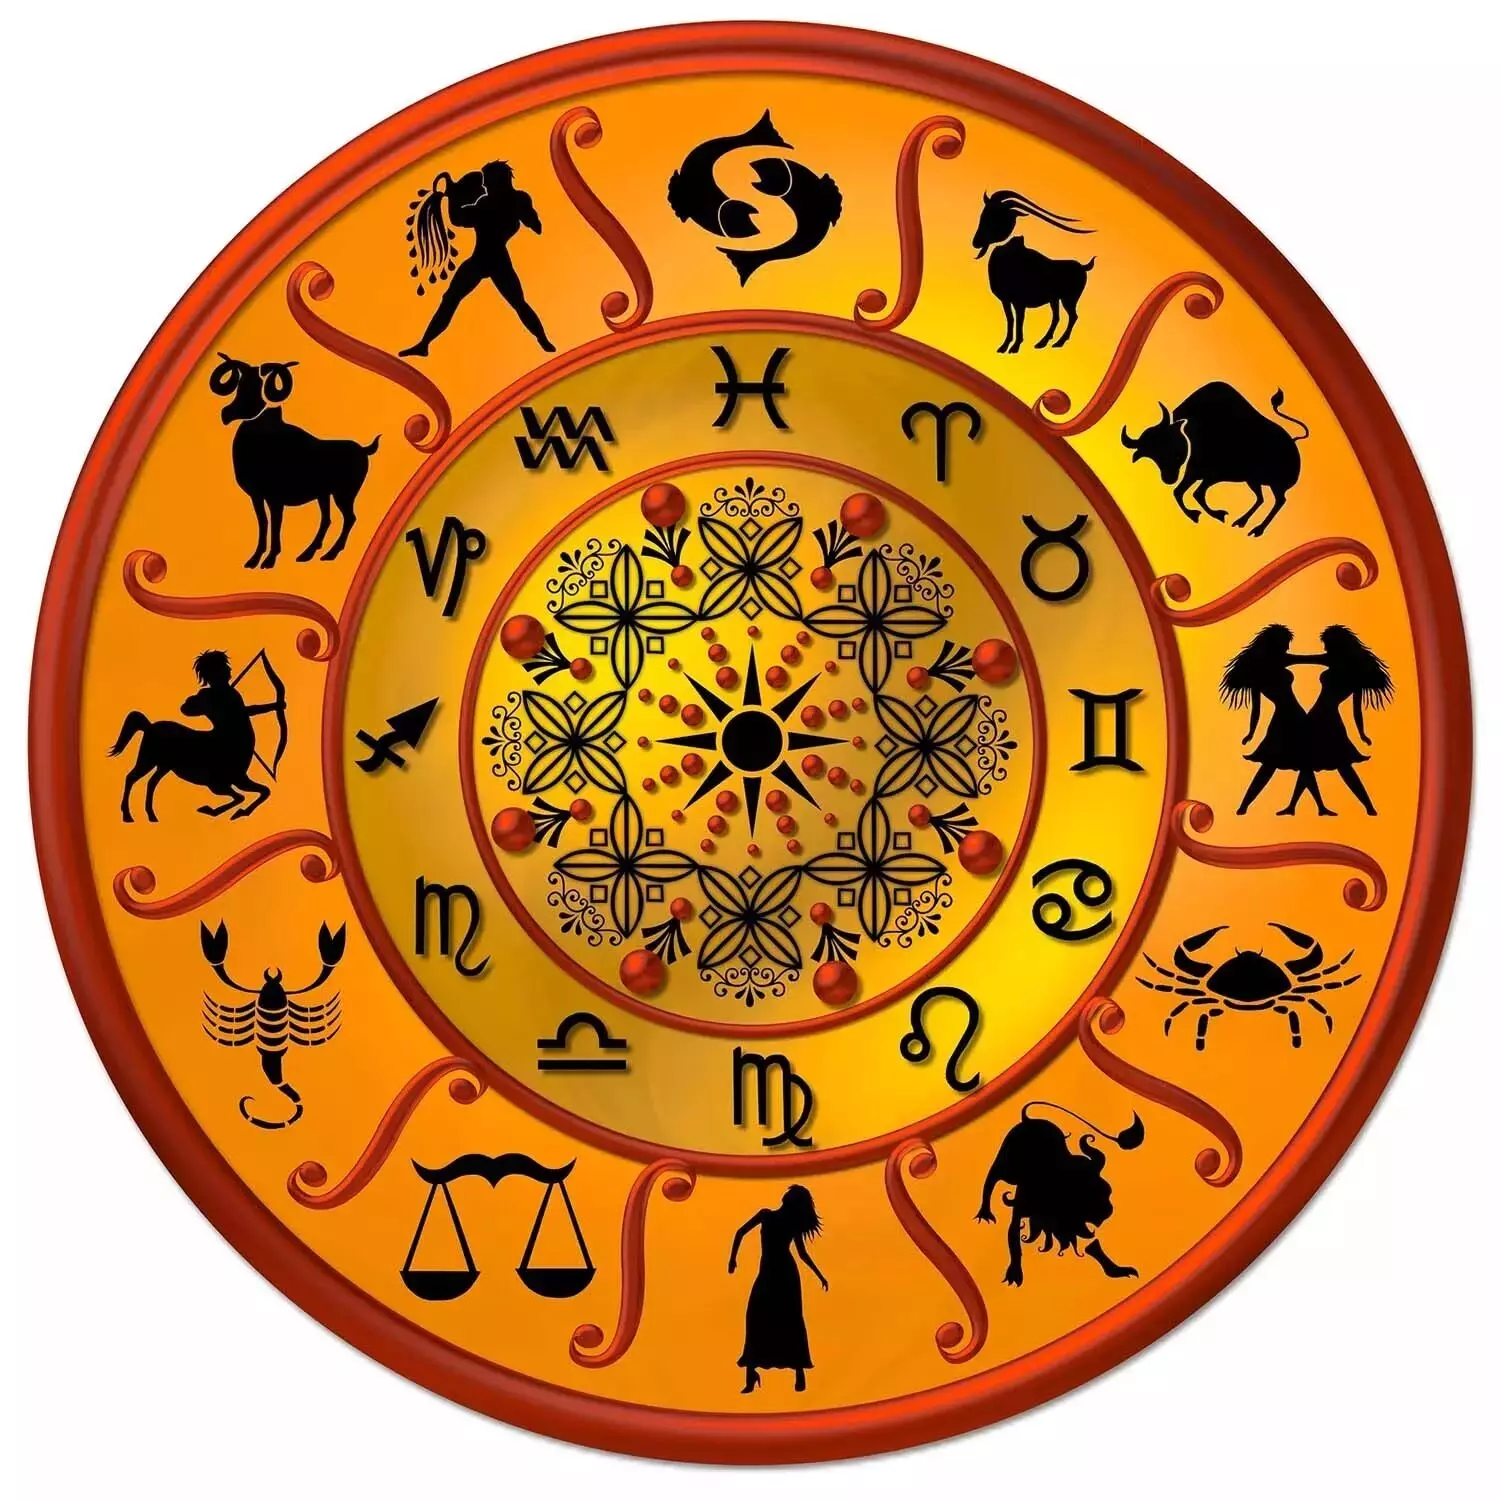 01 April  – Know your todays horoscope